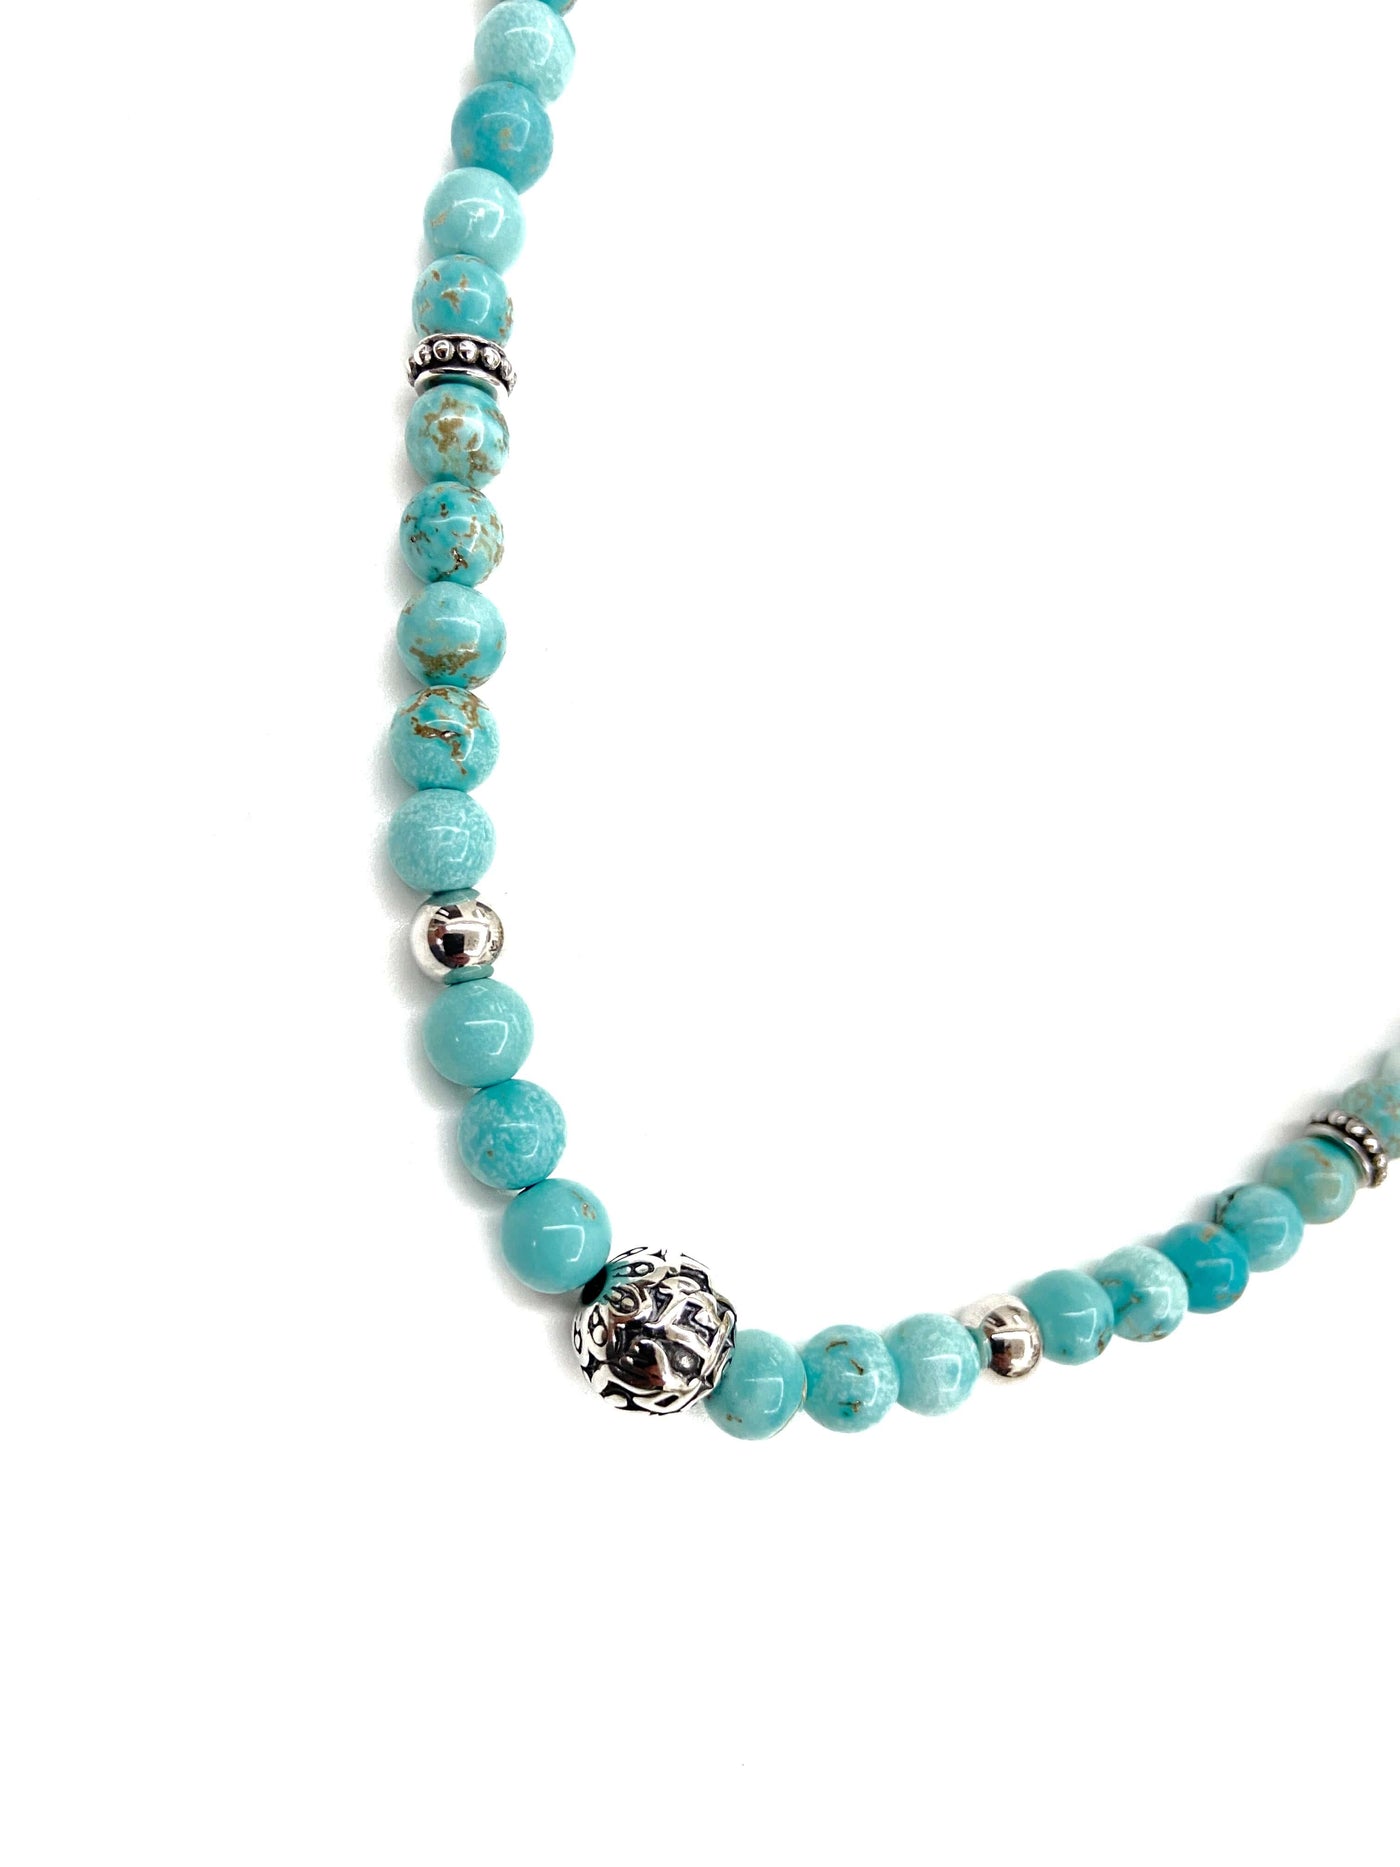 The Turquoise Necklace